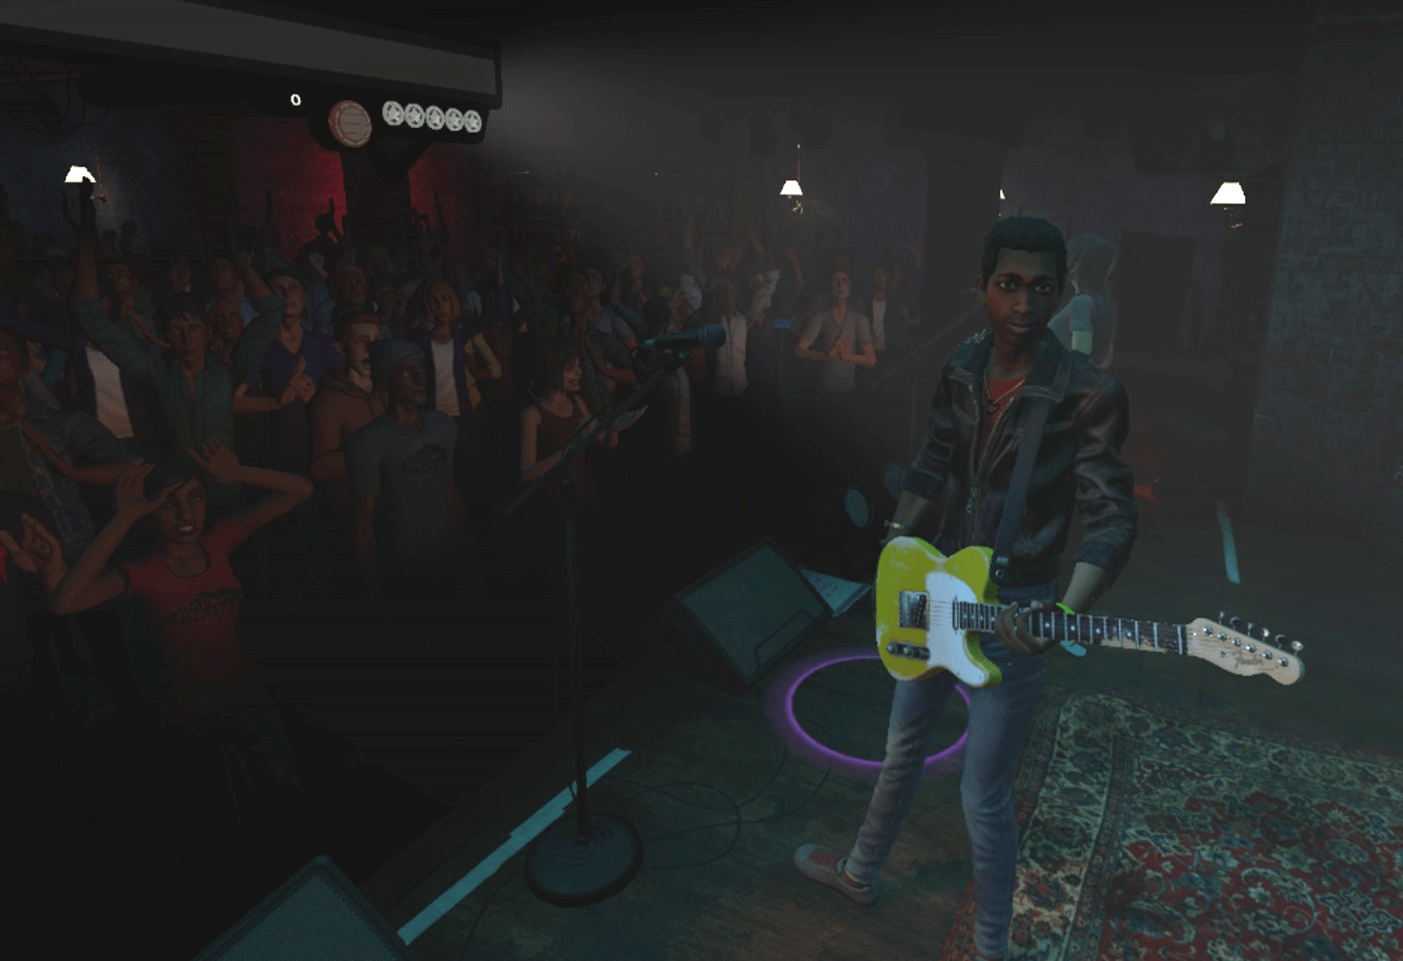 Few People Will Ever Know How Great Rock Band VR Is